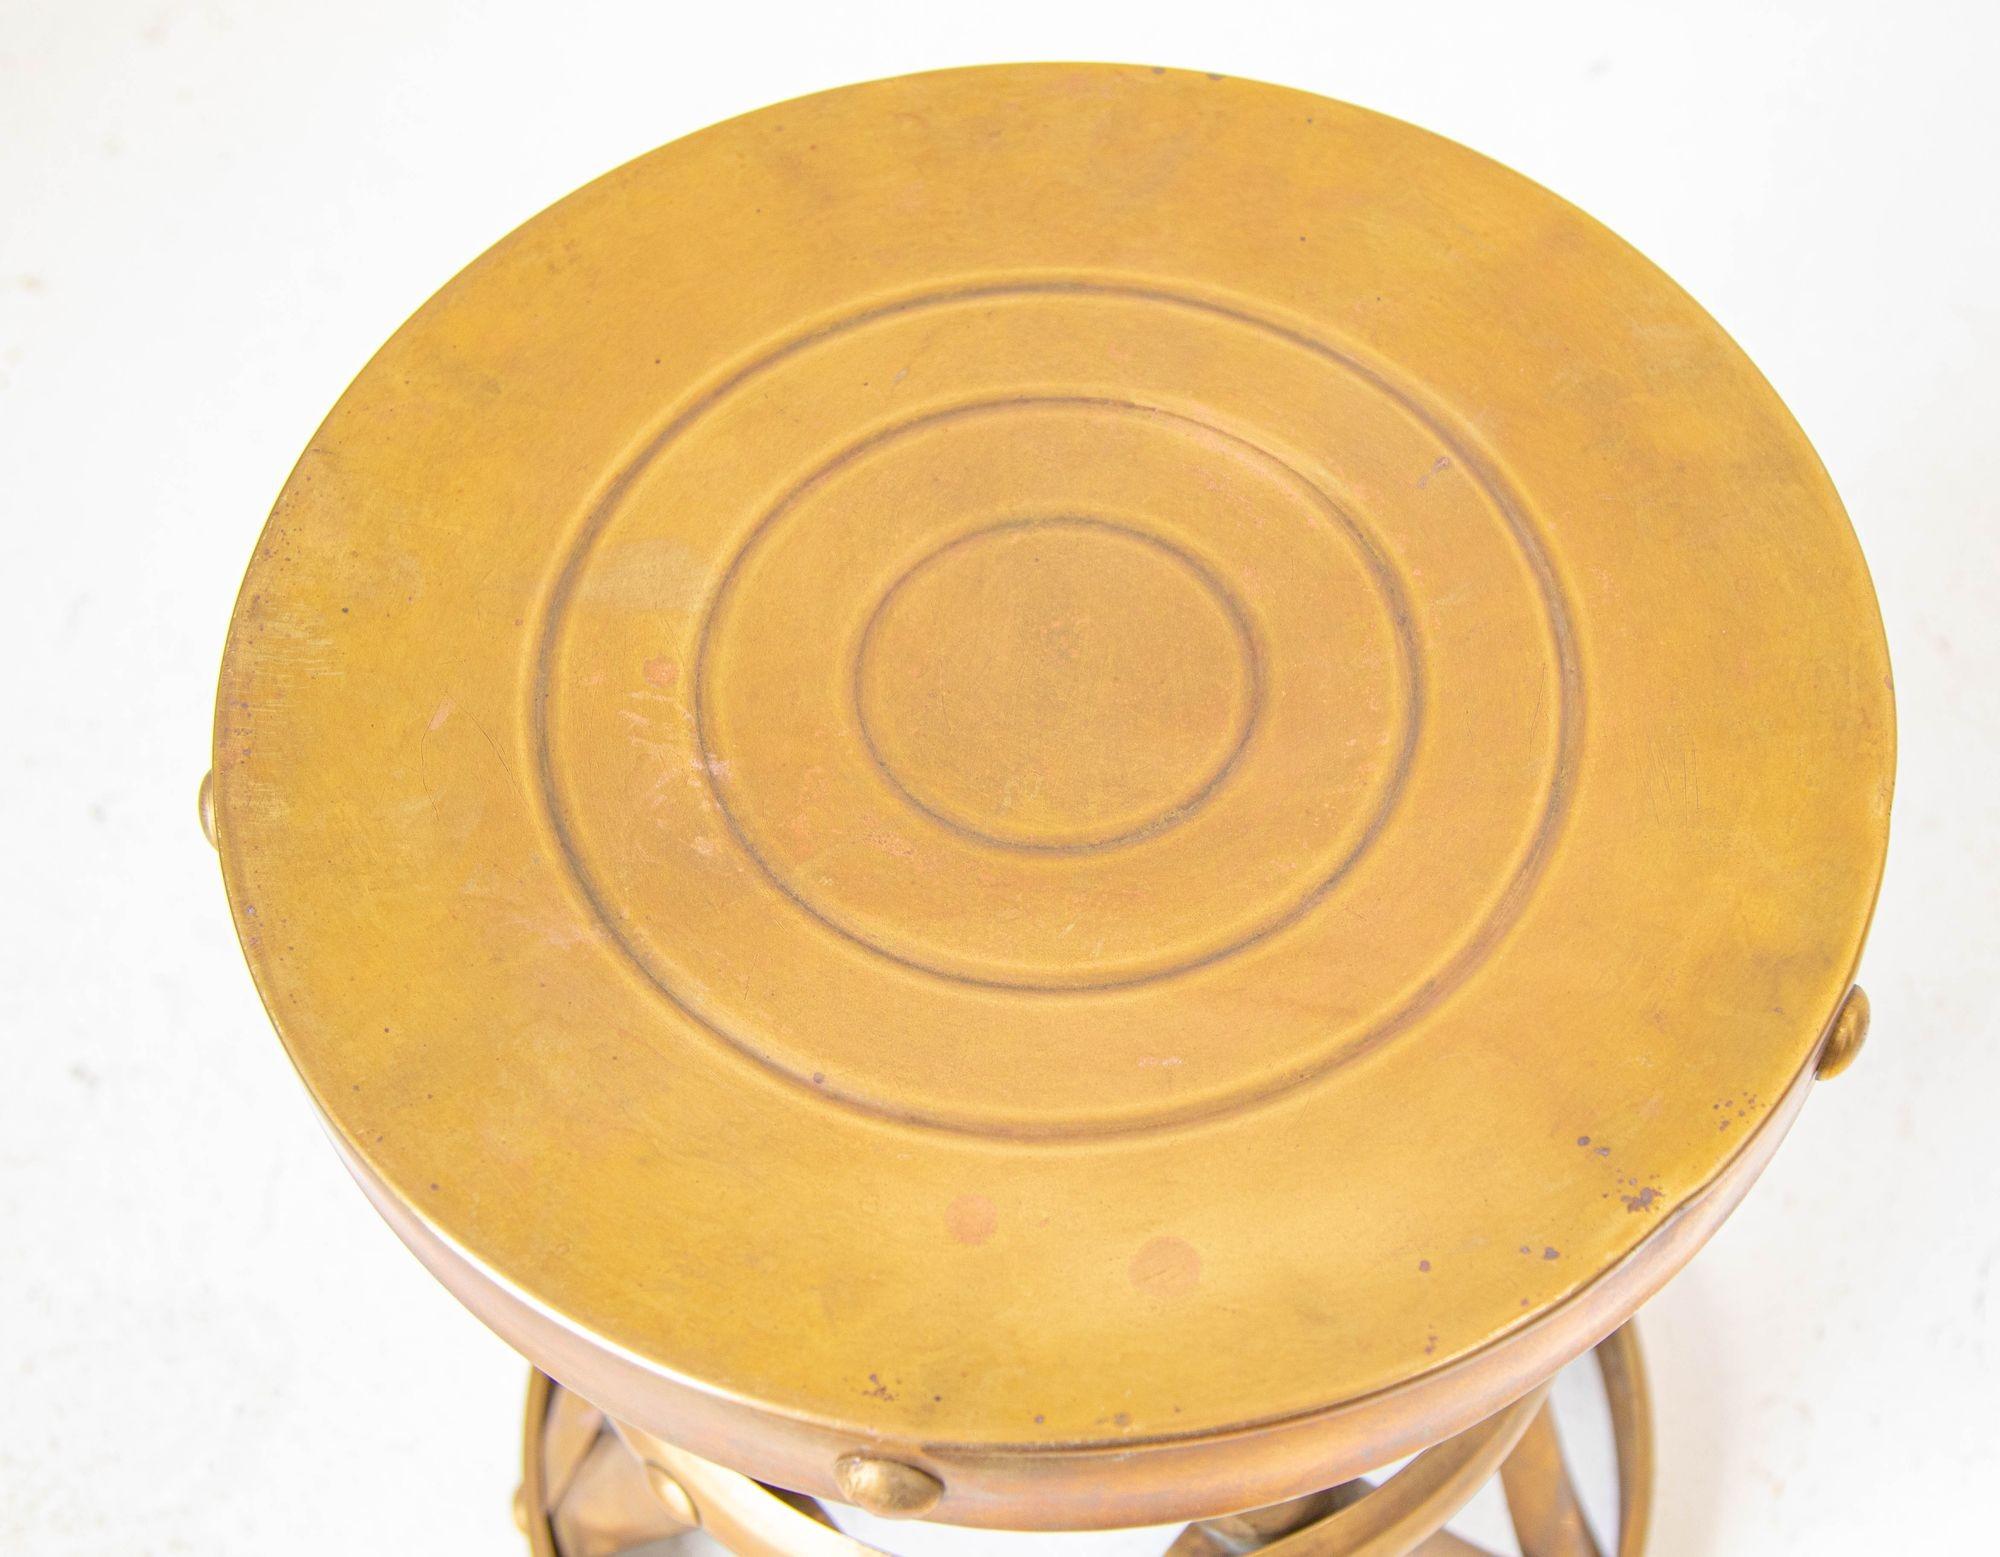 Midcentury Vintage Polished Brass Drum Stool or Side Table, 1960s For Sale 4